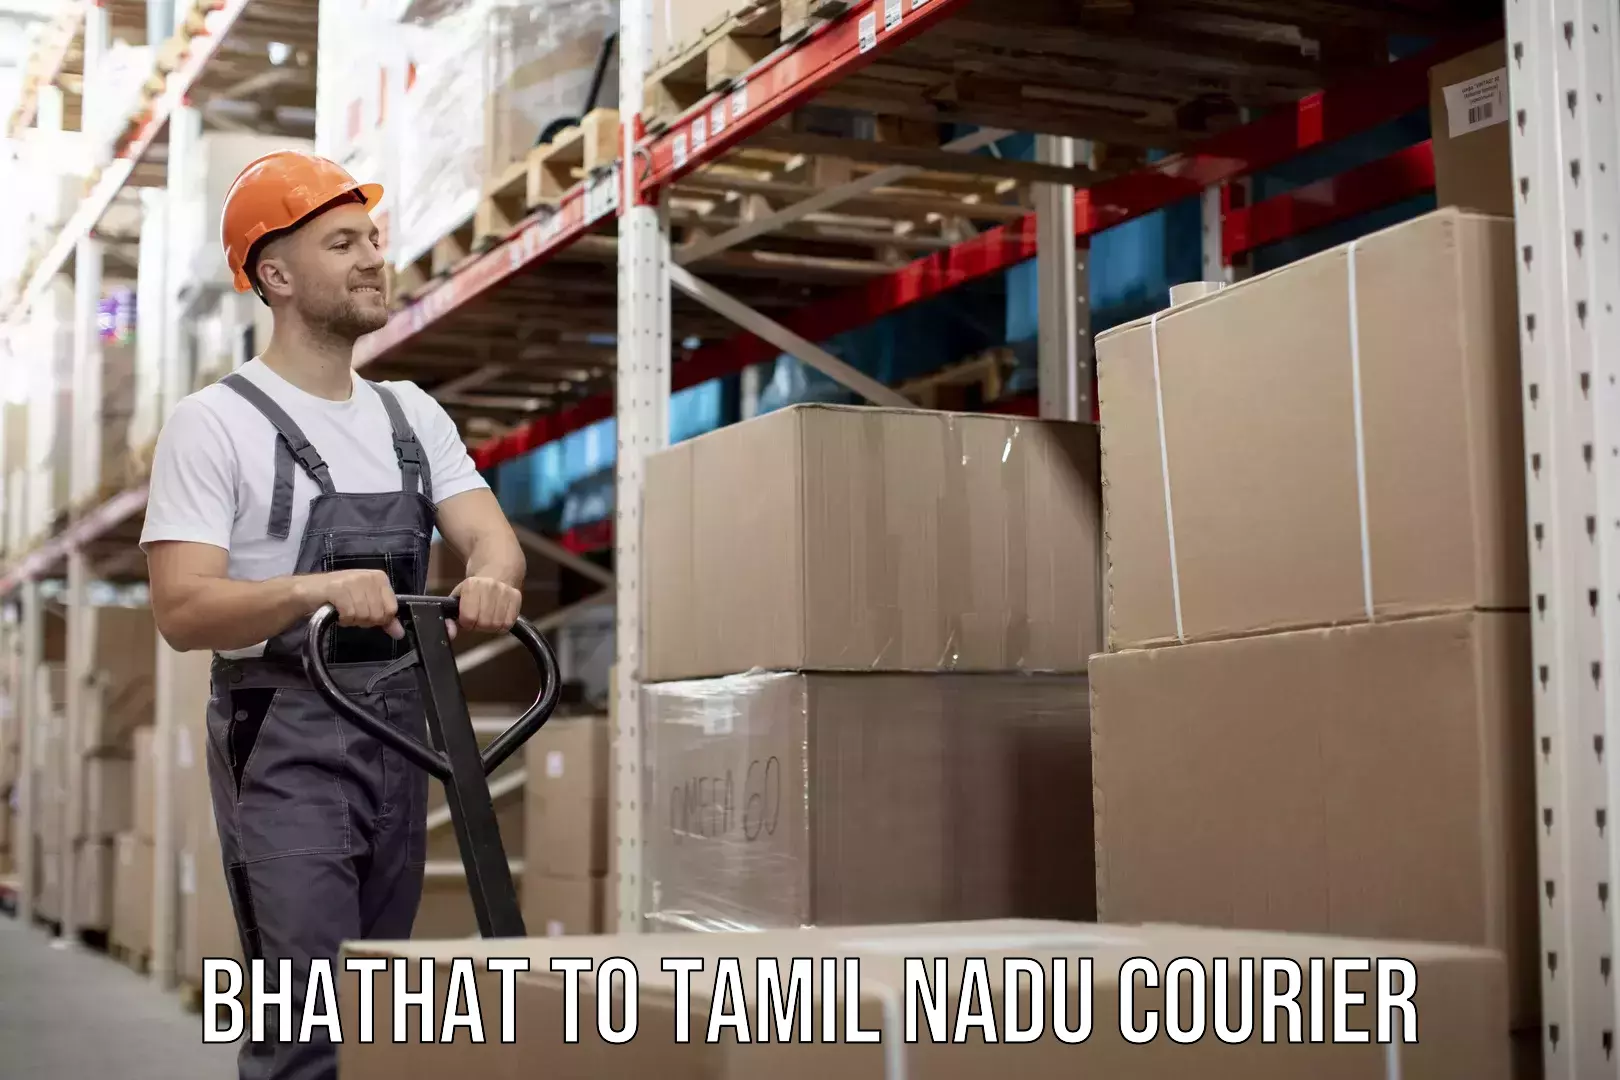 Courier service partnerships Bhathat to Tamil Nadu